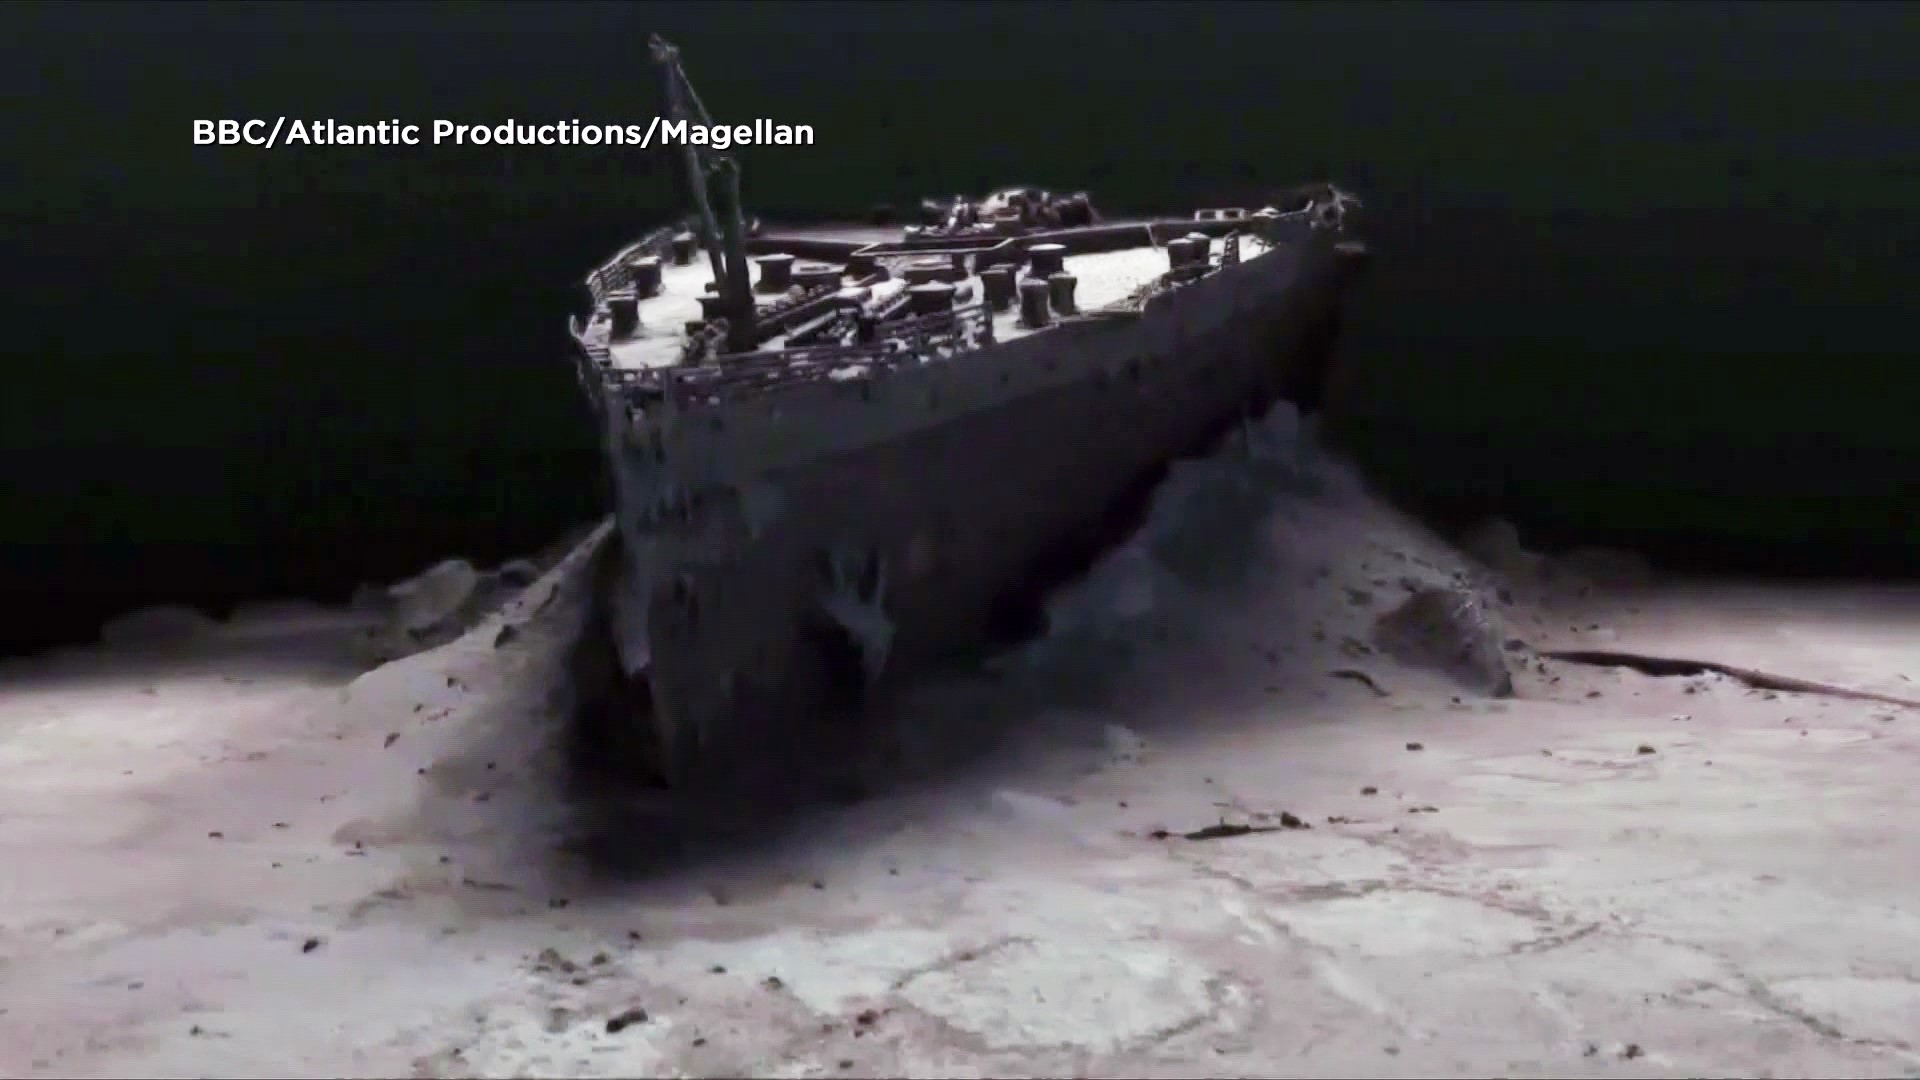 New information gained from this new rendering could provide new information about the ship's sinking.